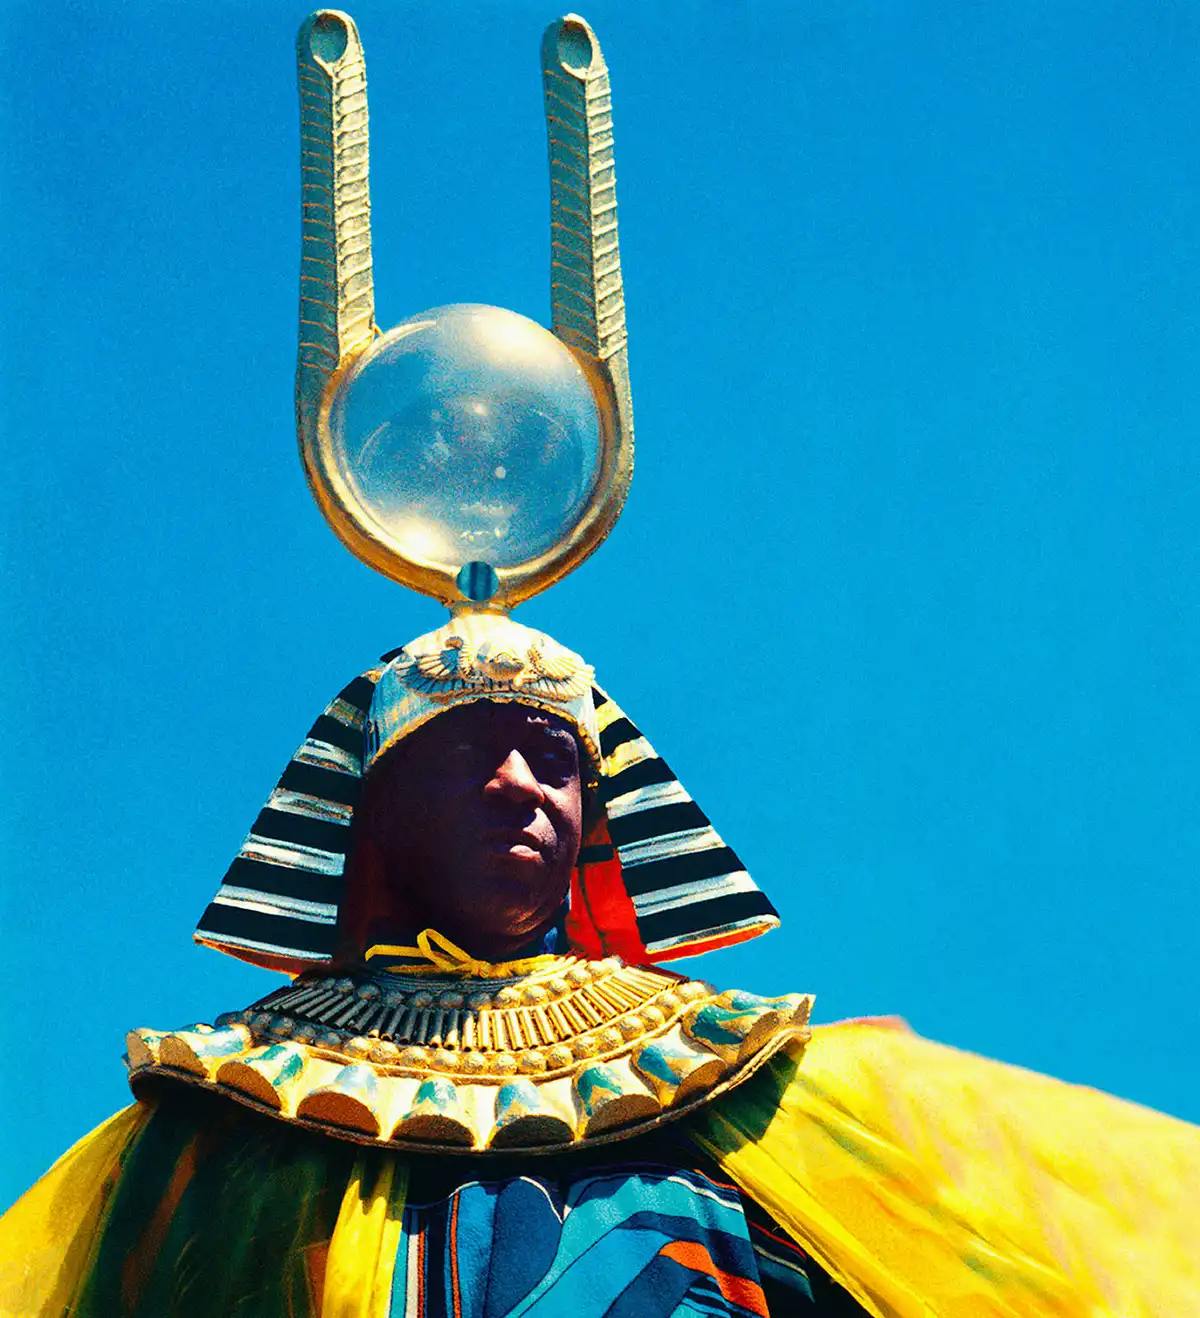 A person wearing a colorful flowing costume with a striped headdress with a clear orb supported by golden horn-like prongs